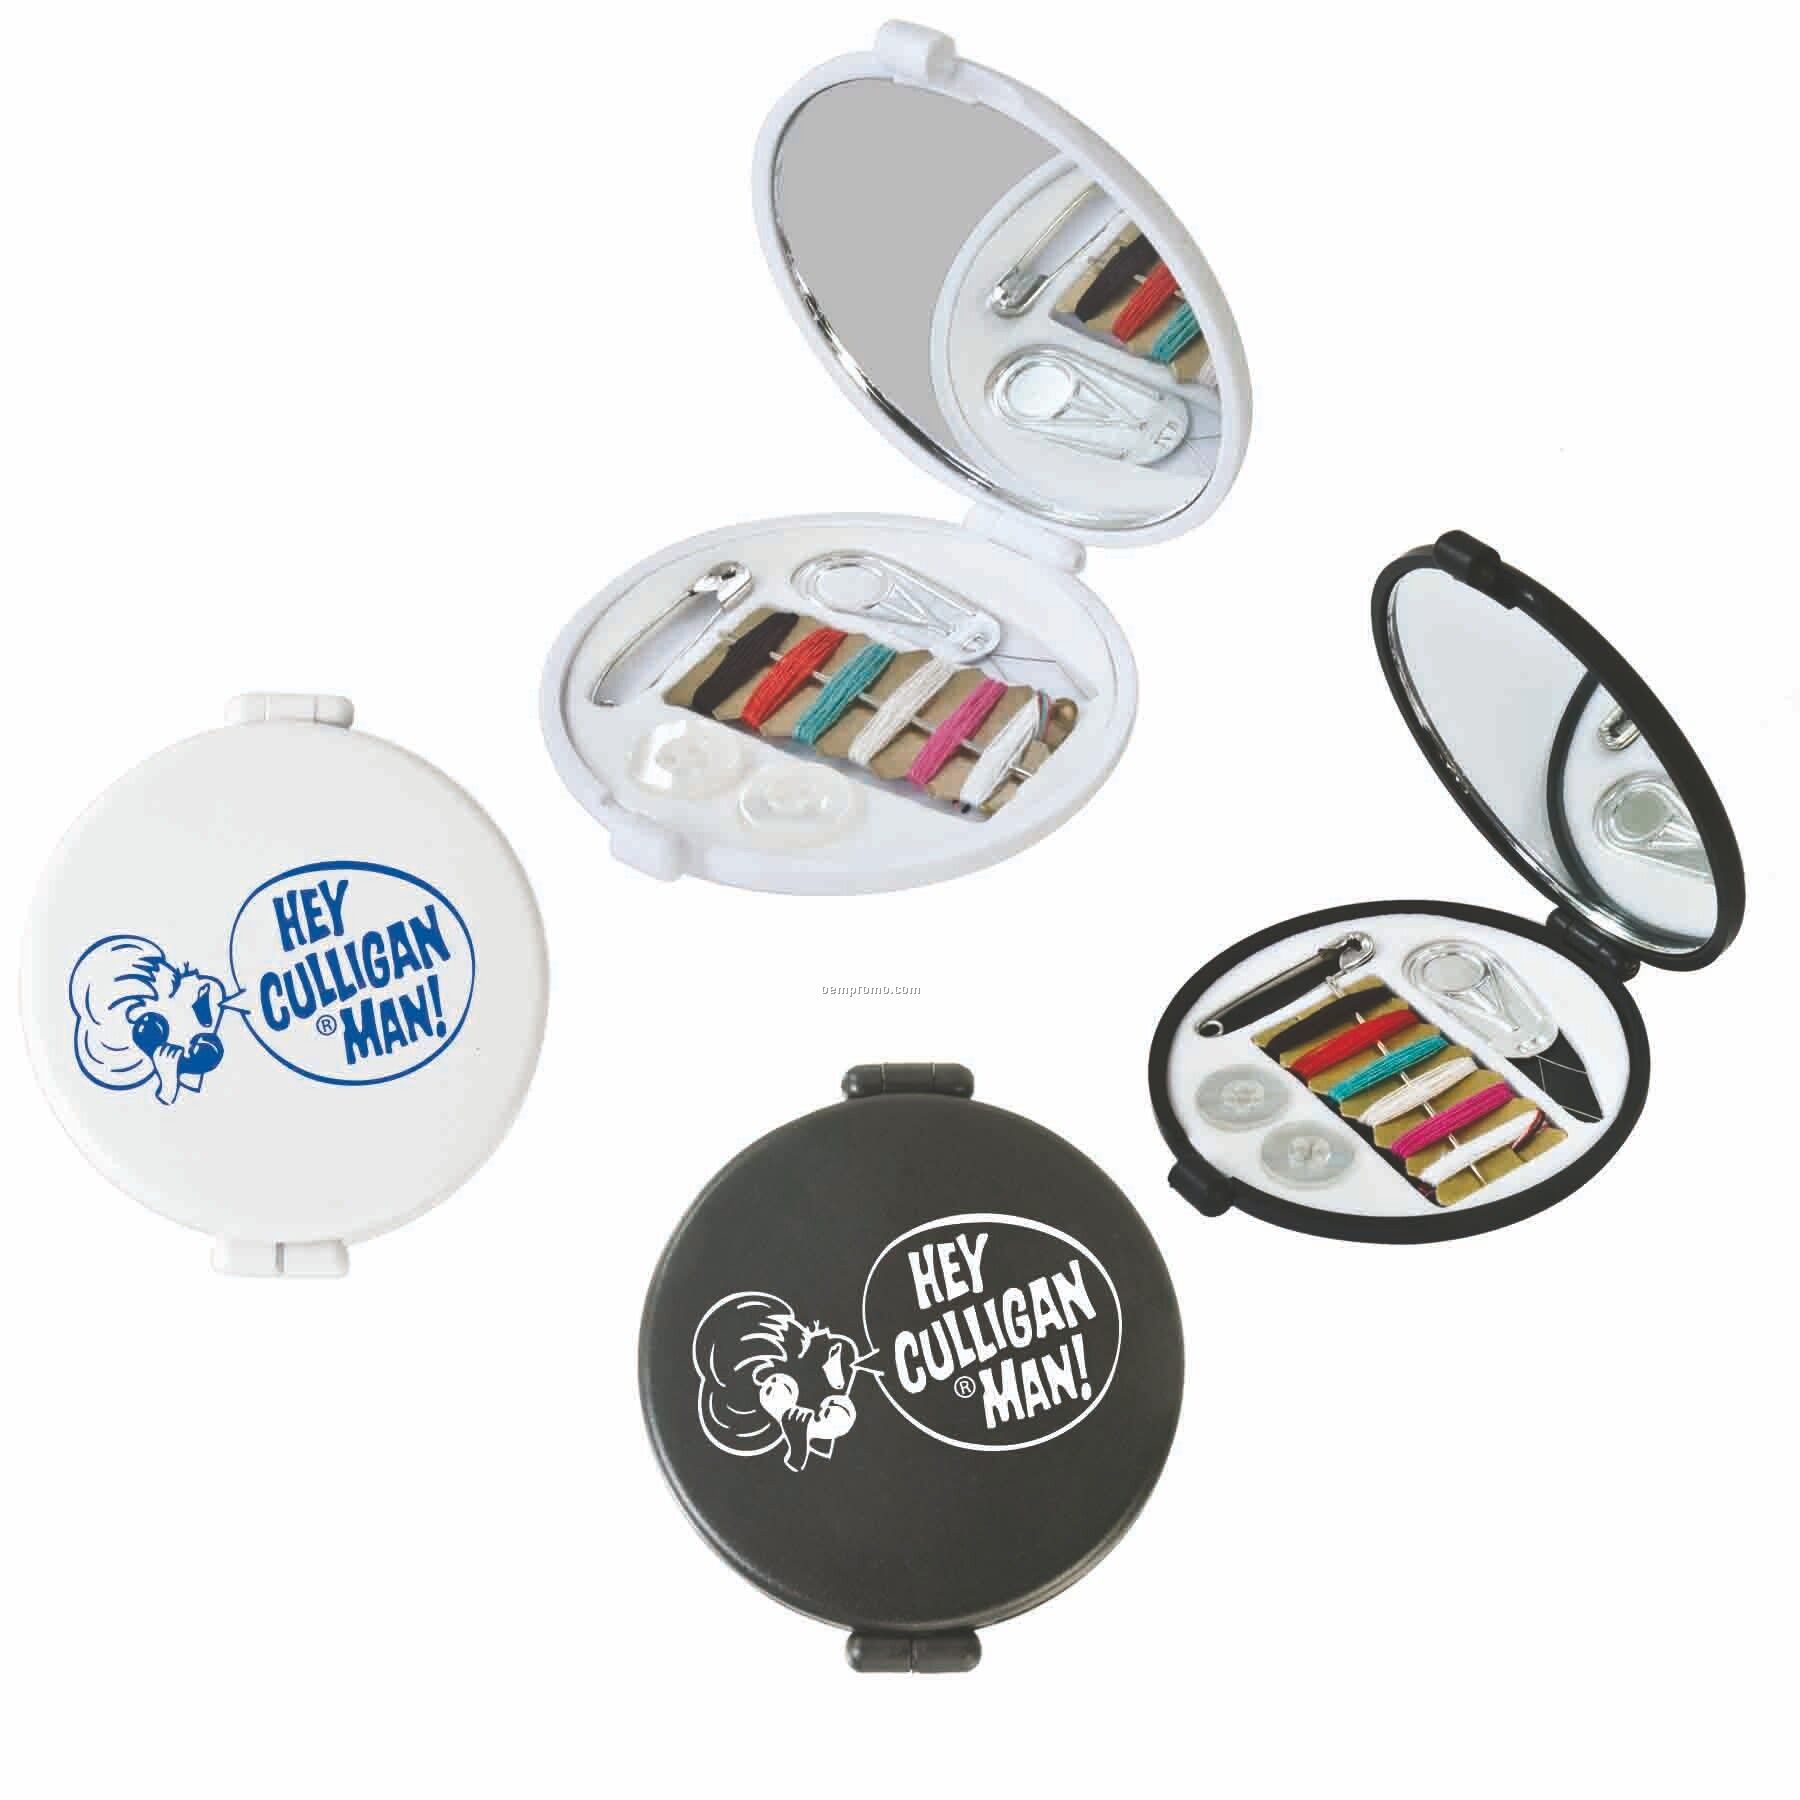 Compact Sewing Mirror